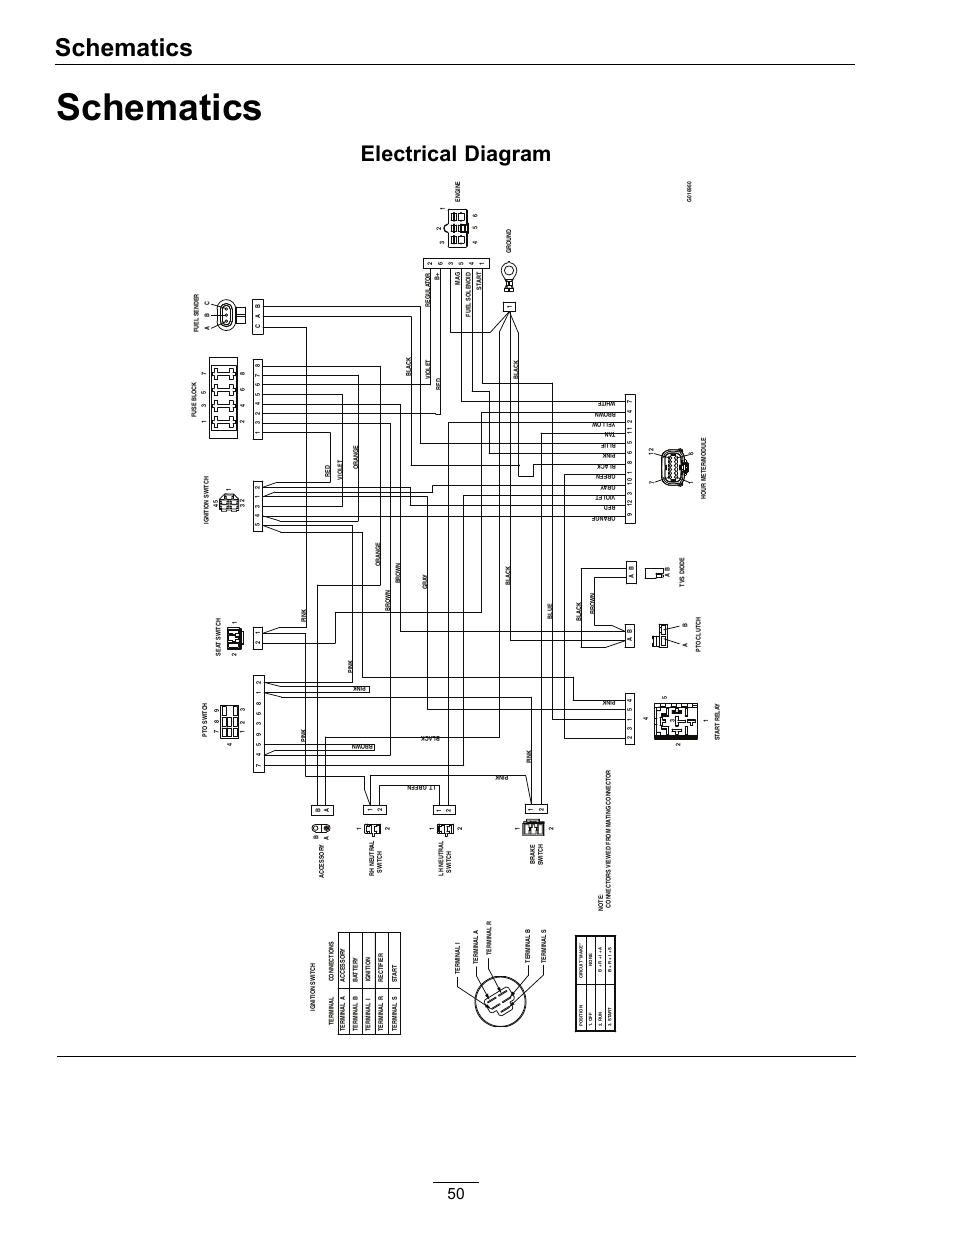 sargent harmony h1 wiring diagram